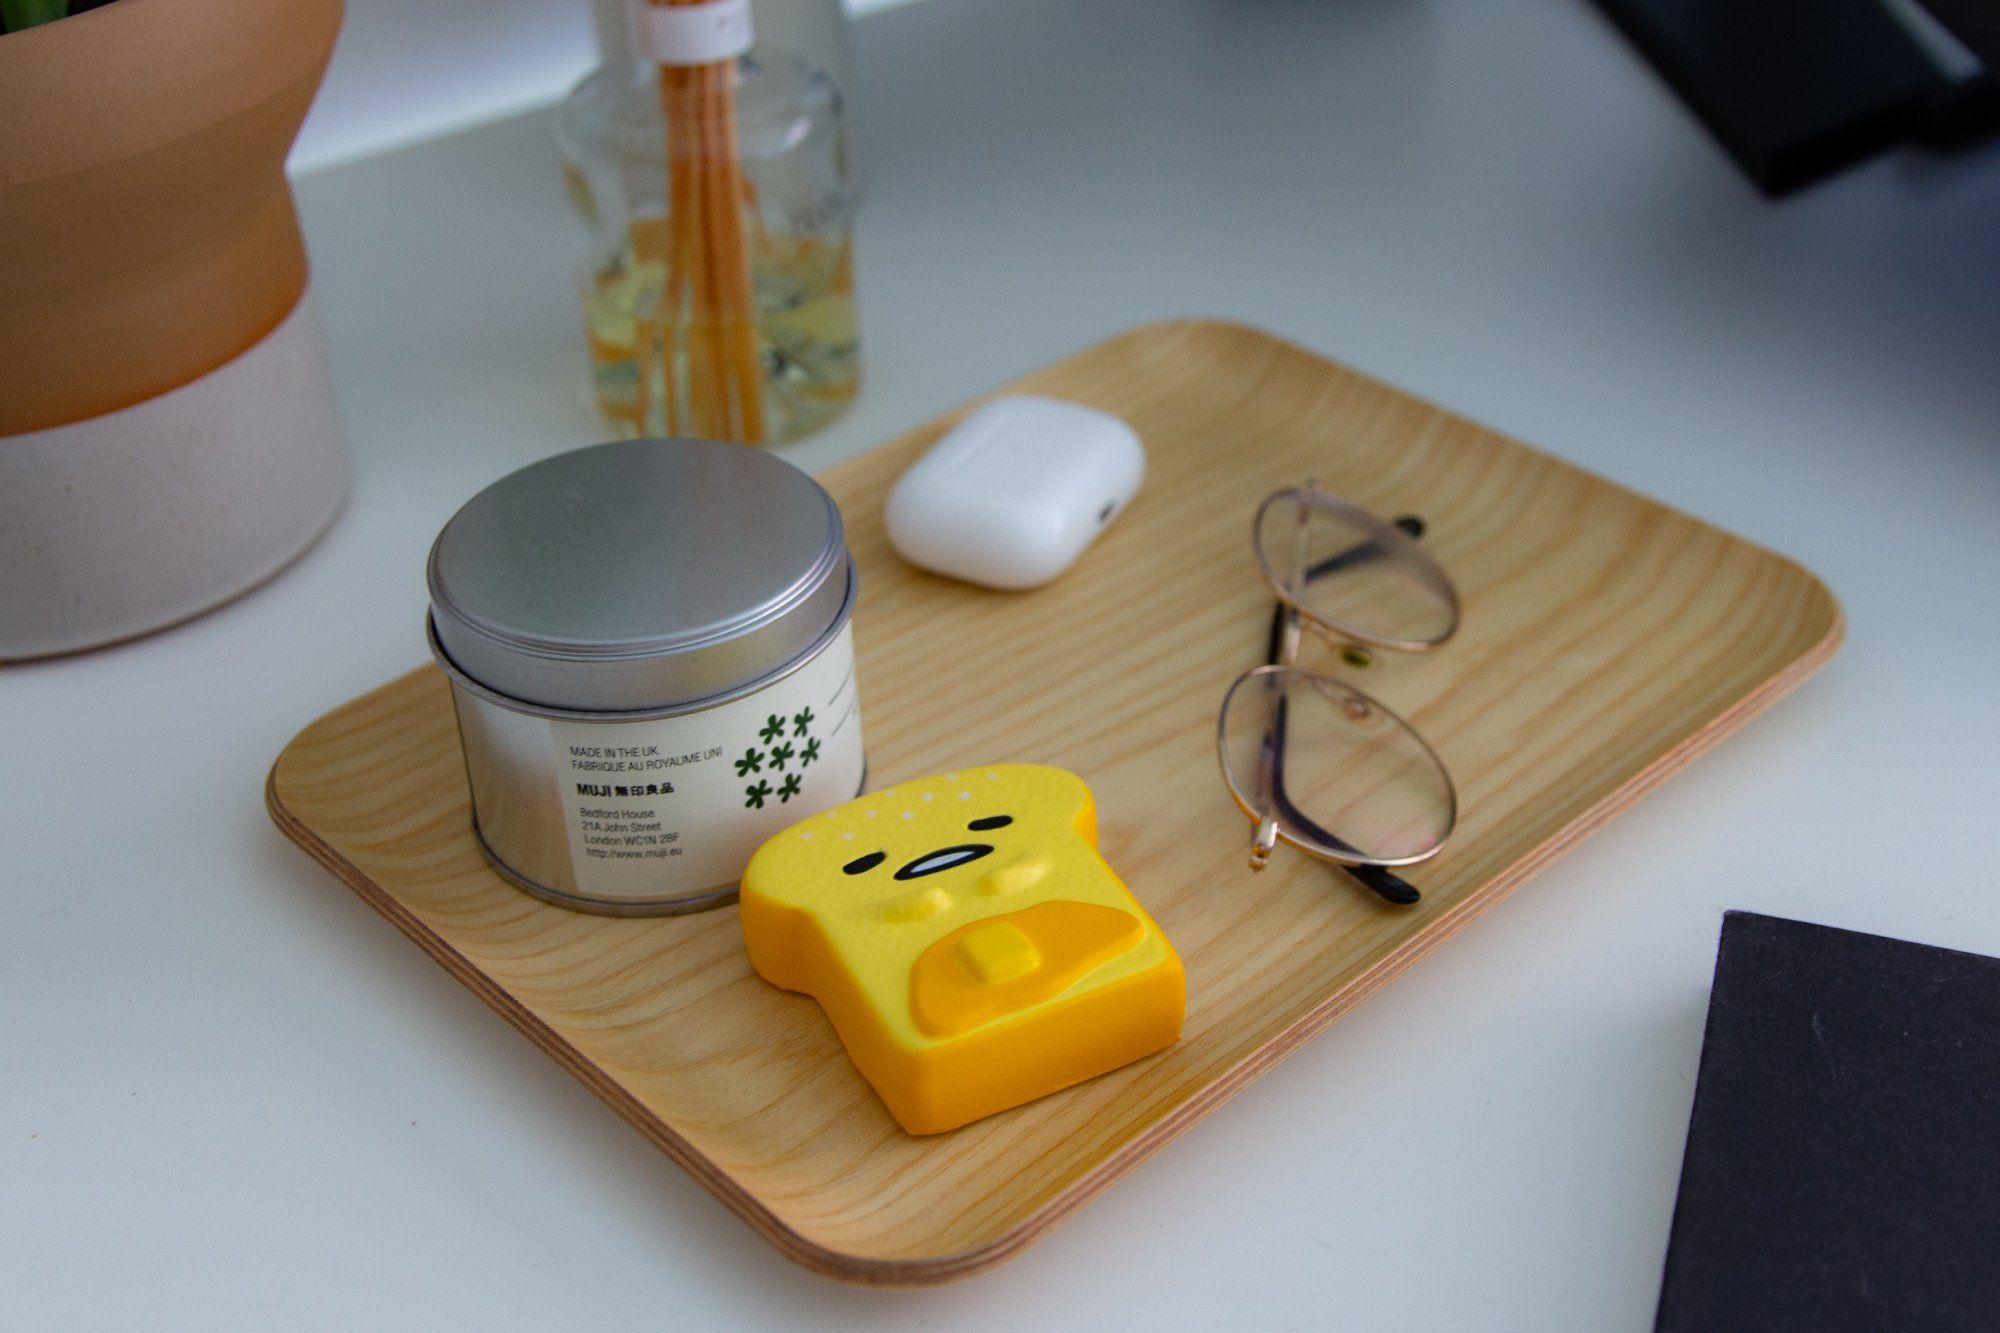 A Gudetama squishy anti-stress toy, a candle, glasses and Apple AirPods Pro